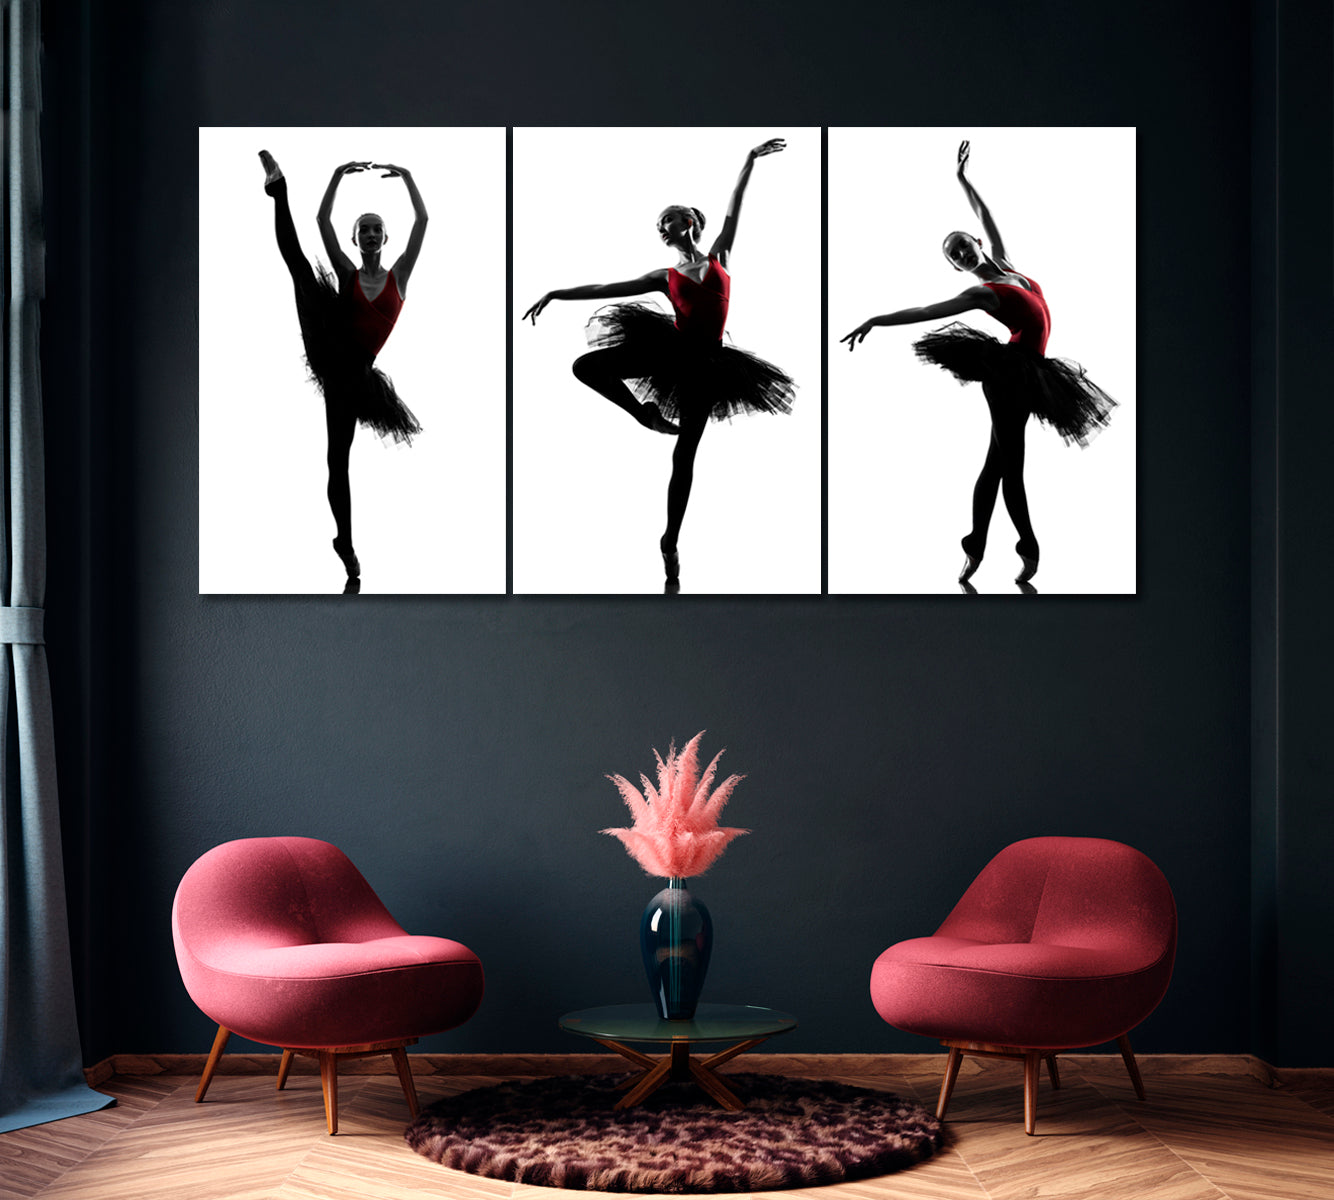 Set of 3 Ballerina Silhouette Canvas Print ArtLexy 3 Panels 48”x24” inches 